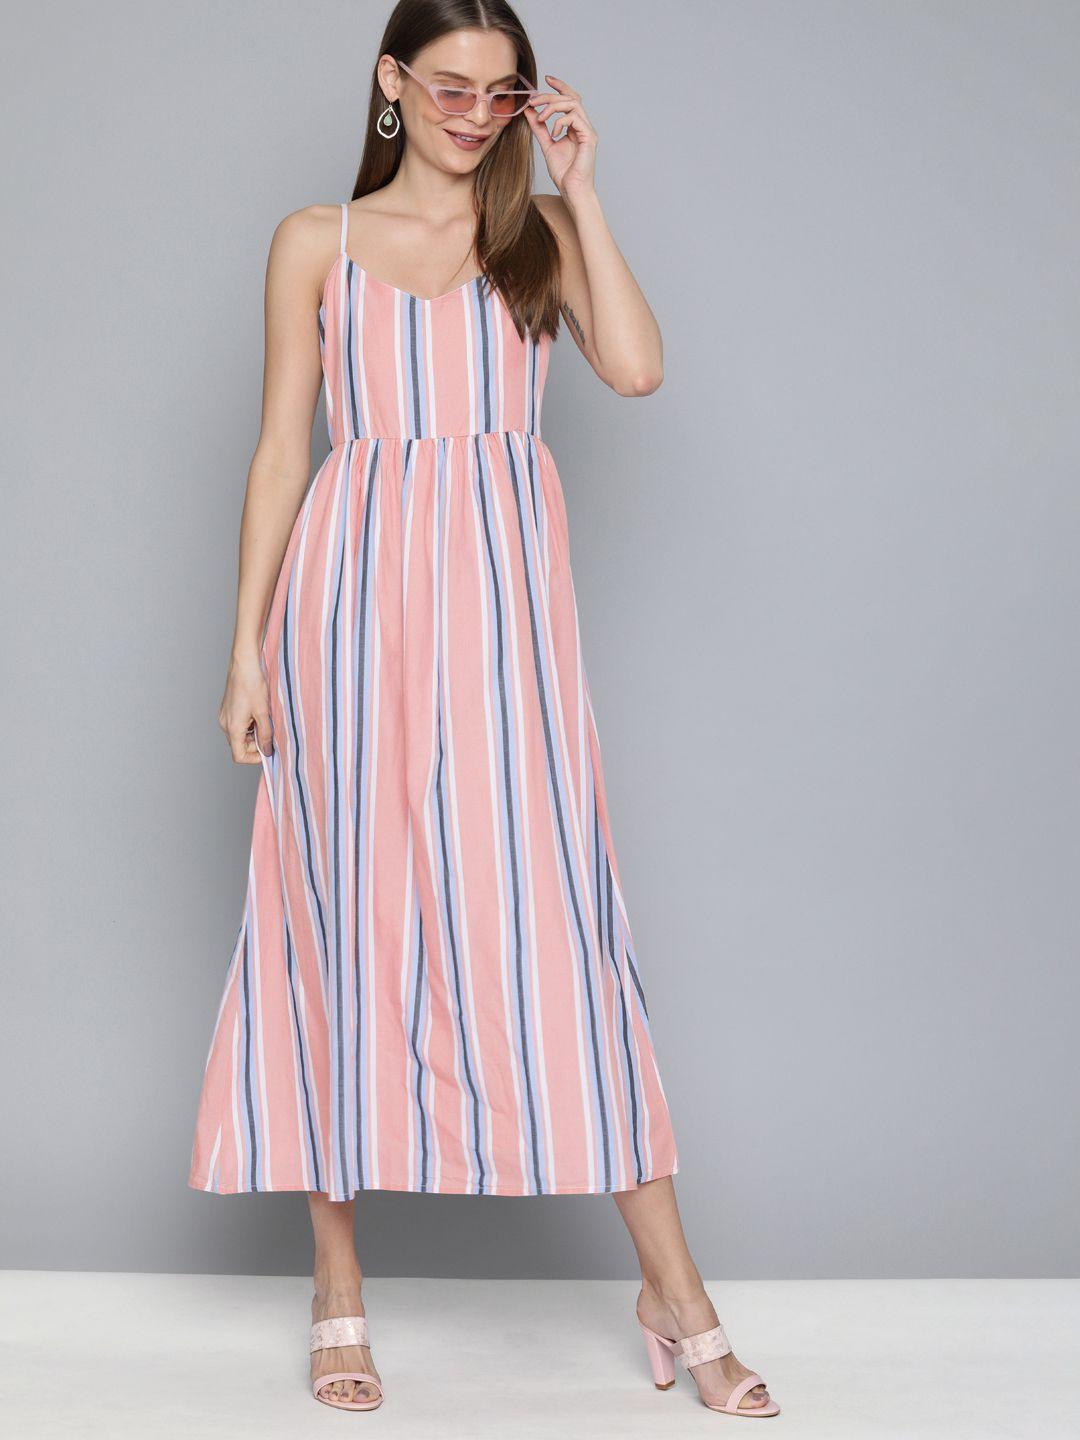 here&now women peach-coloured and blue striped a-line dress